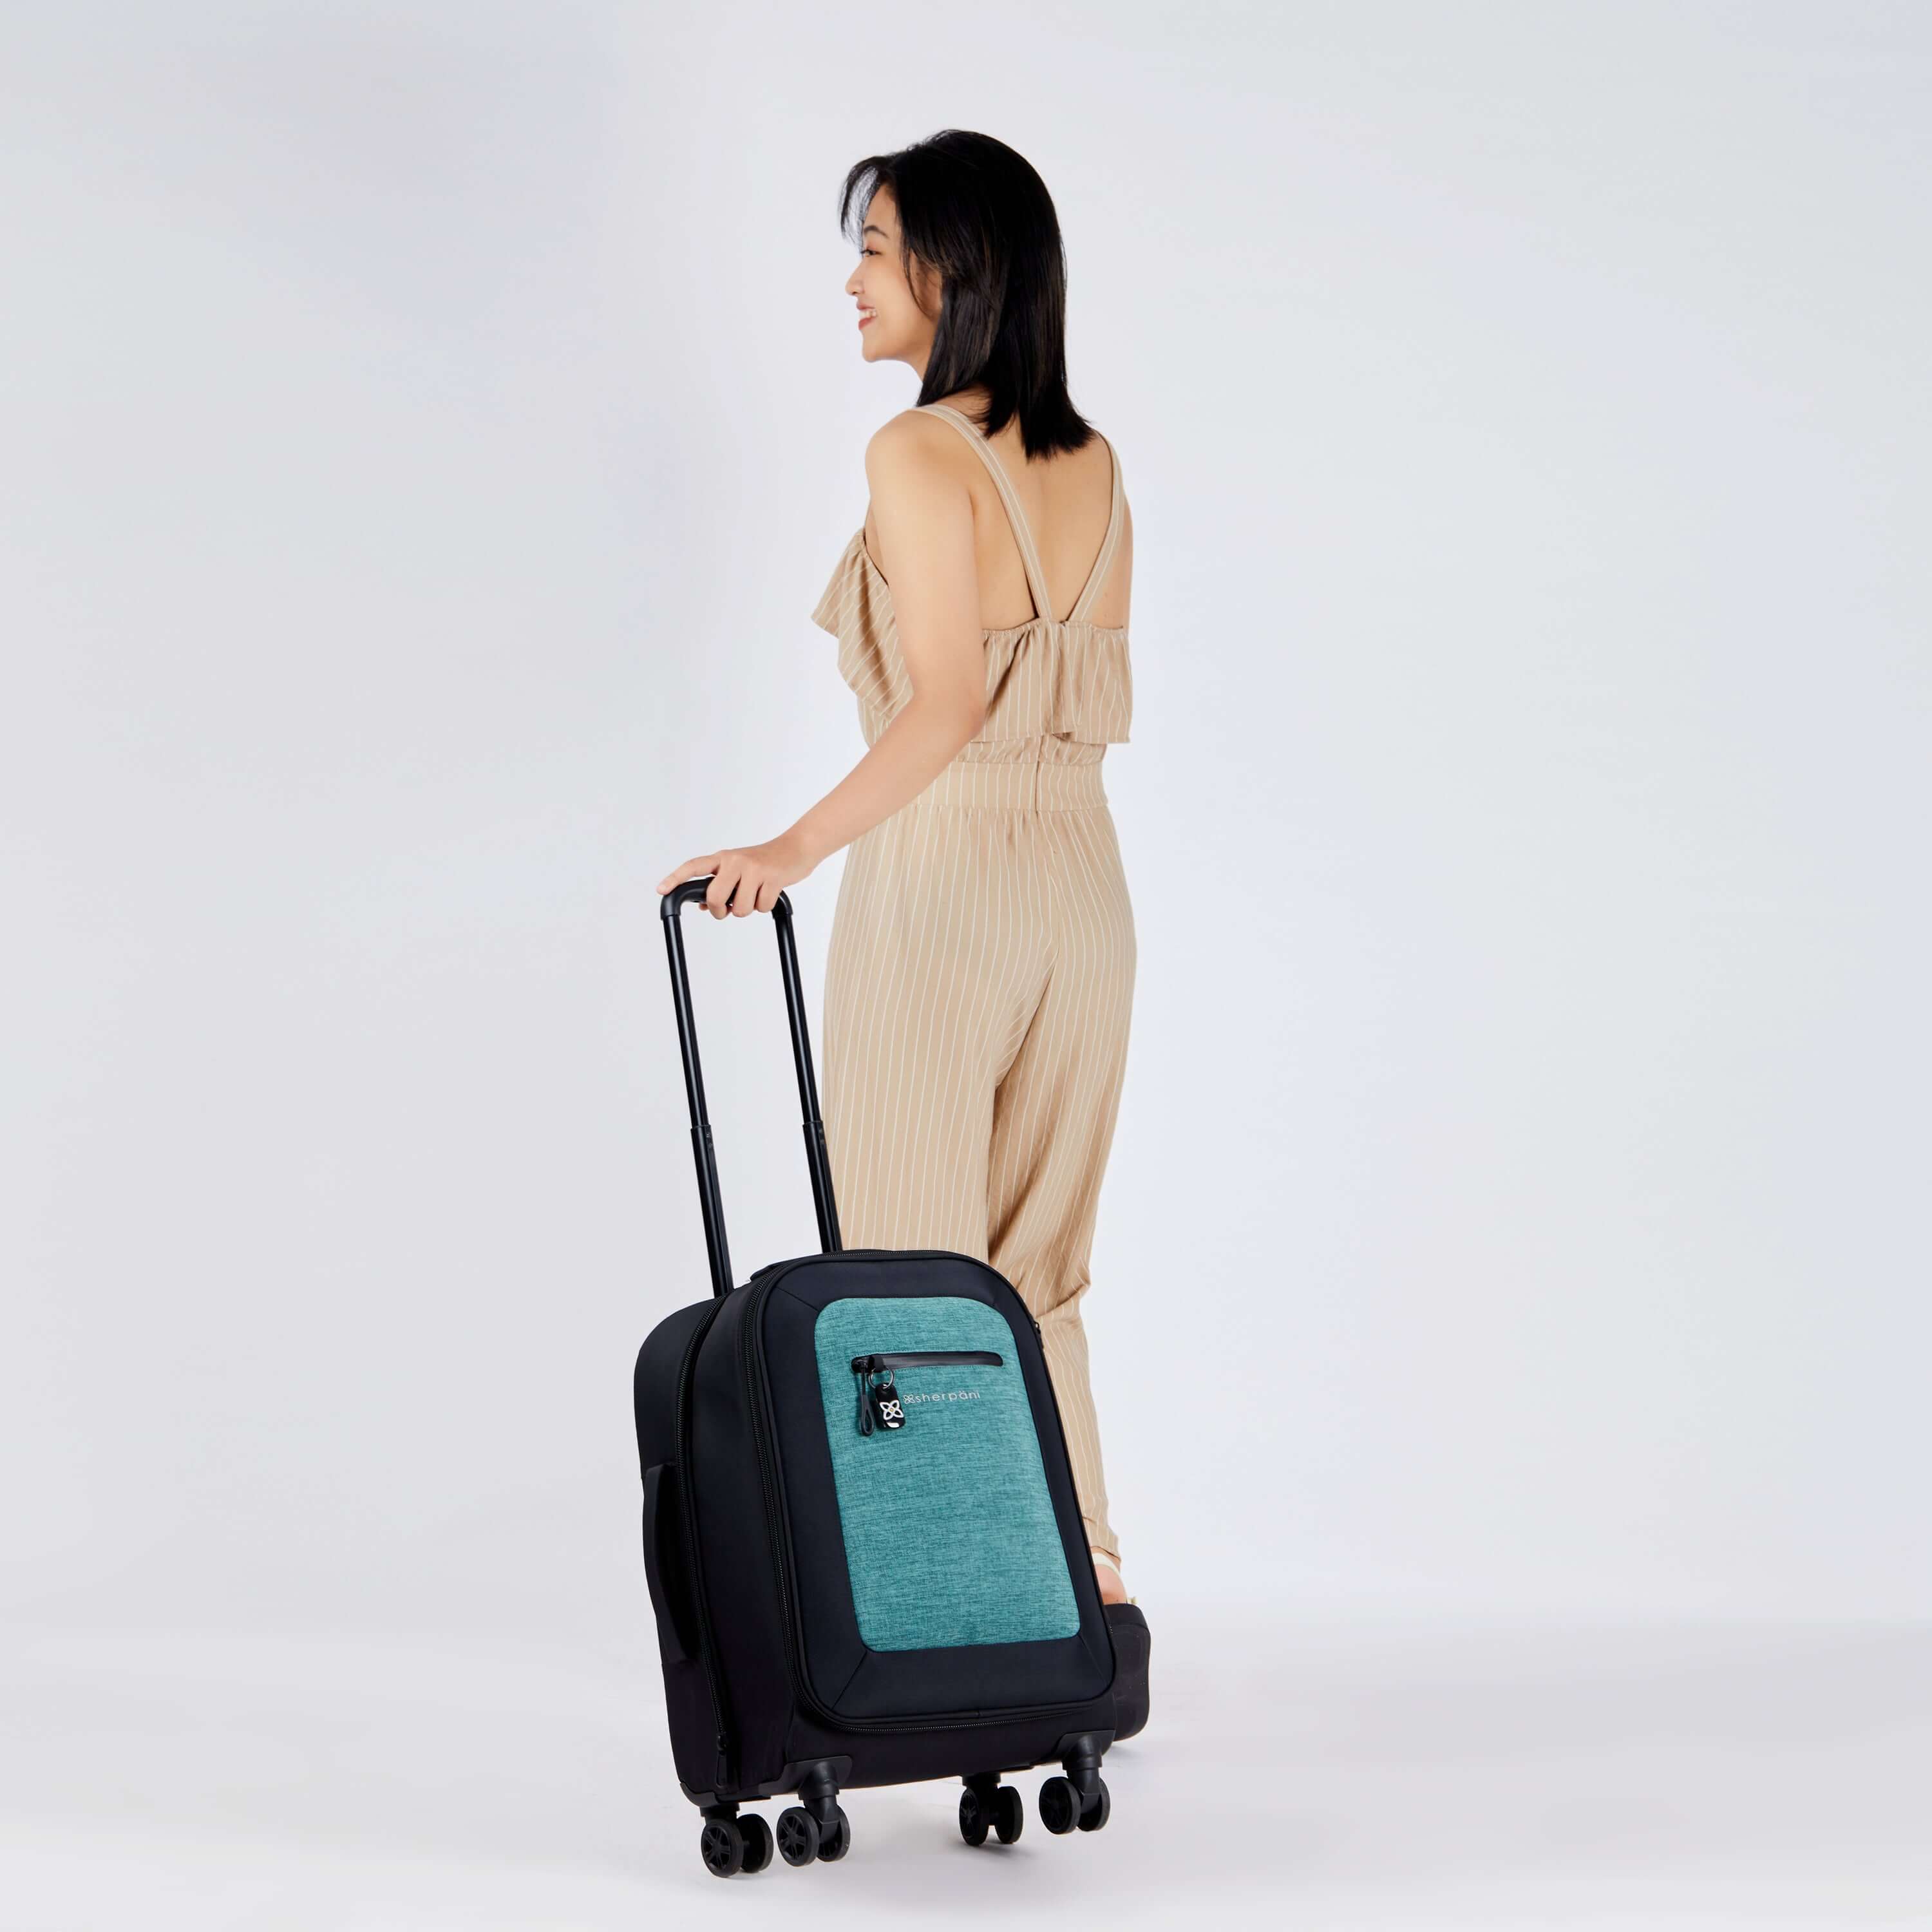 Full bodied view of a dark haired model facing away from the camera. She is wearing a tan jumpsuit. Sherpani&#39;s Anti-Theft luggage, the Latitude in Teal, rolls along beside her.